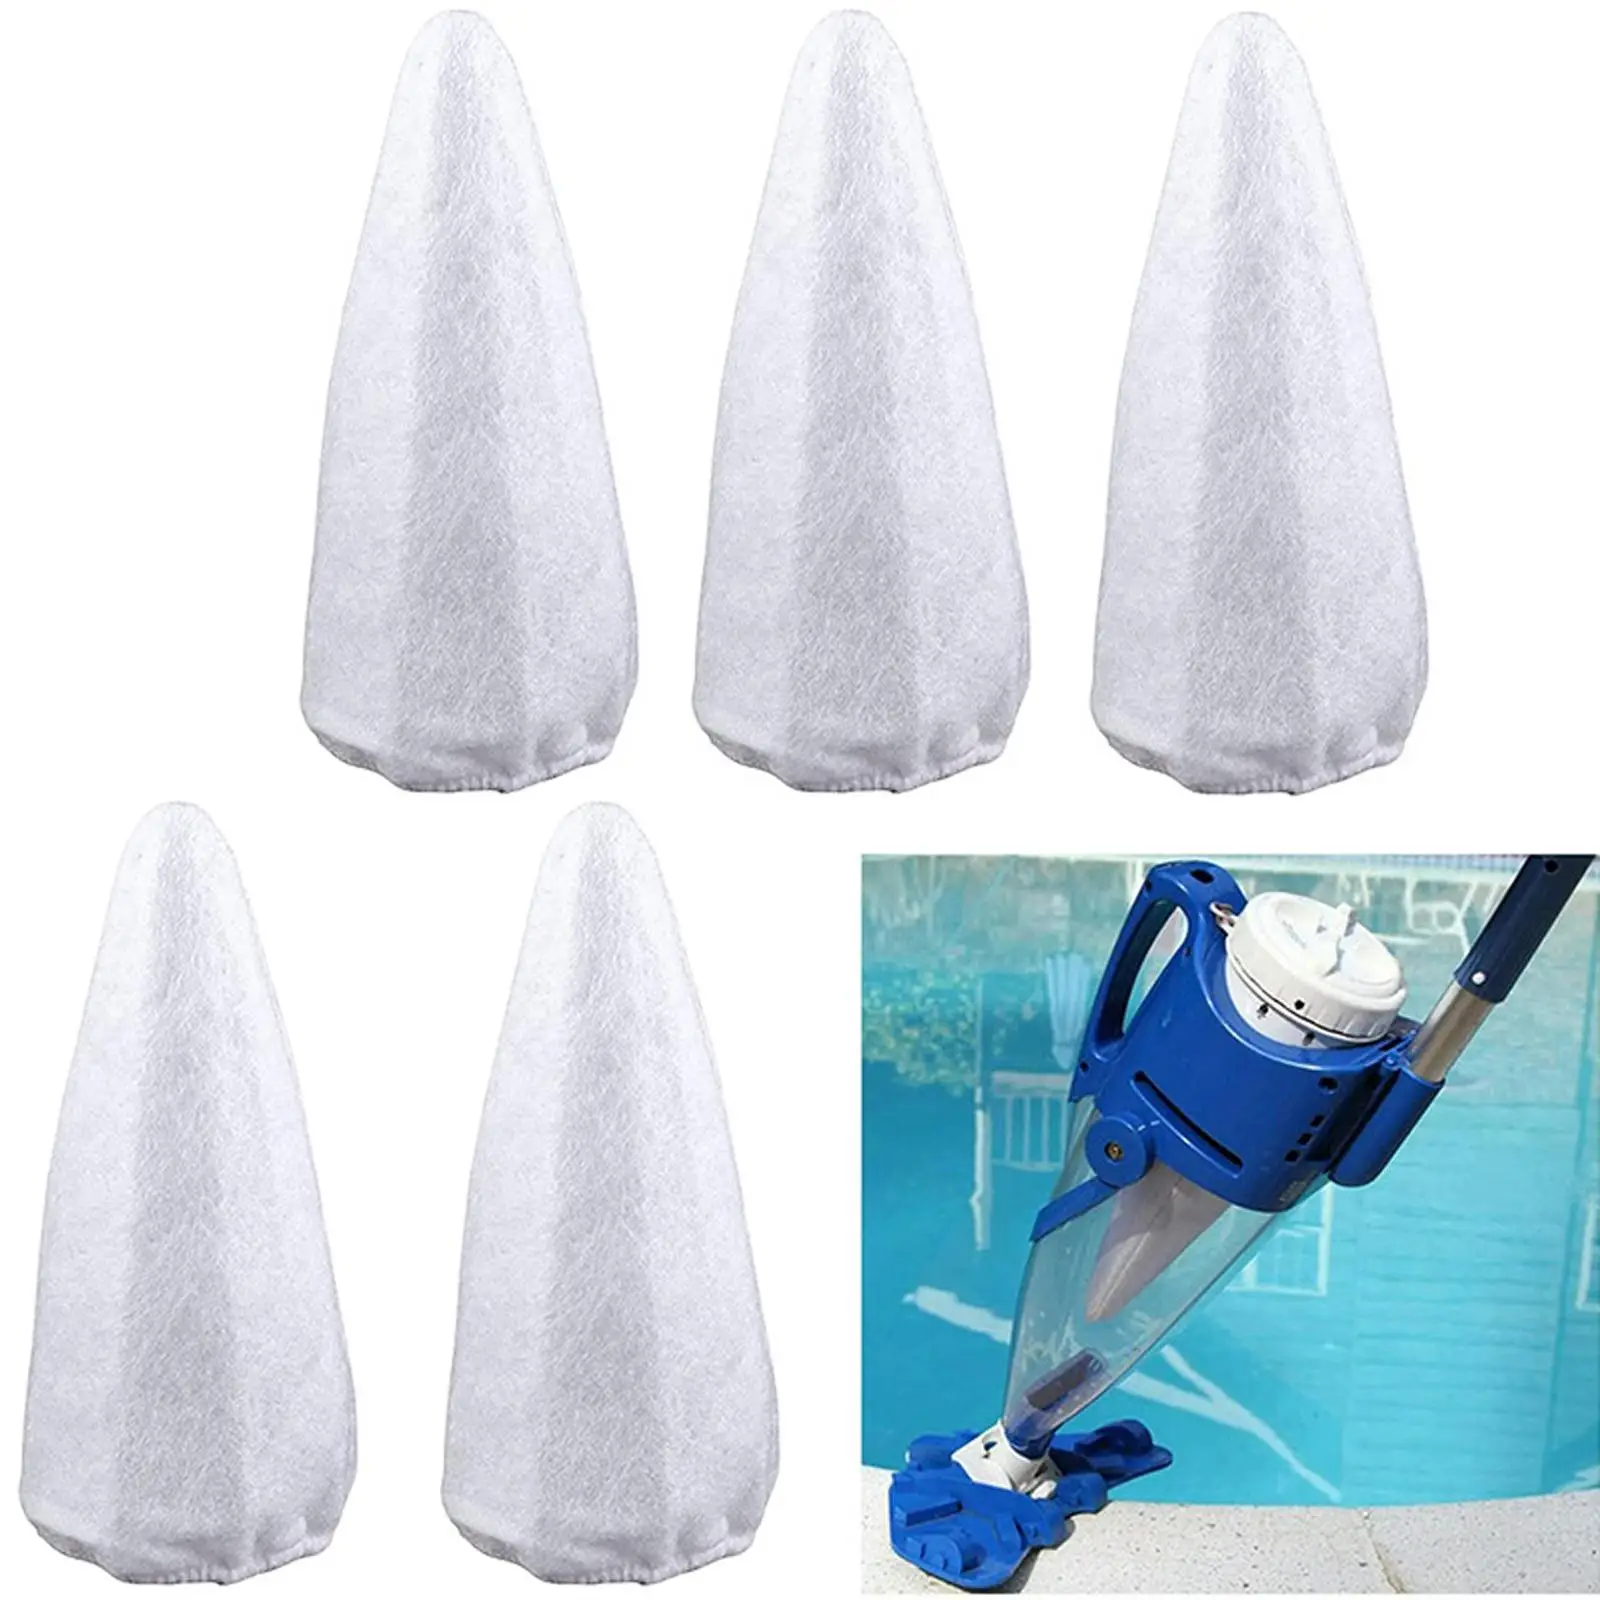 5 Pieces Vacuum Filter Replacements Sand and Silt Swimming Pool Filter for Pool Vacuum